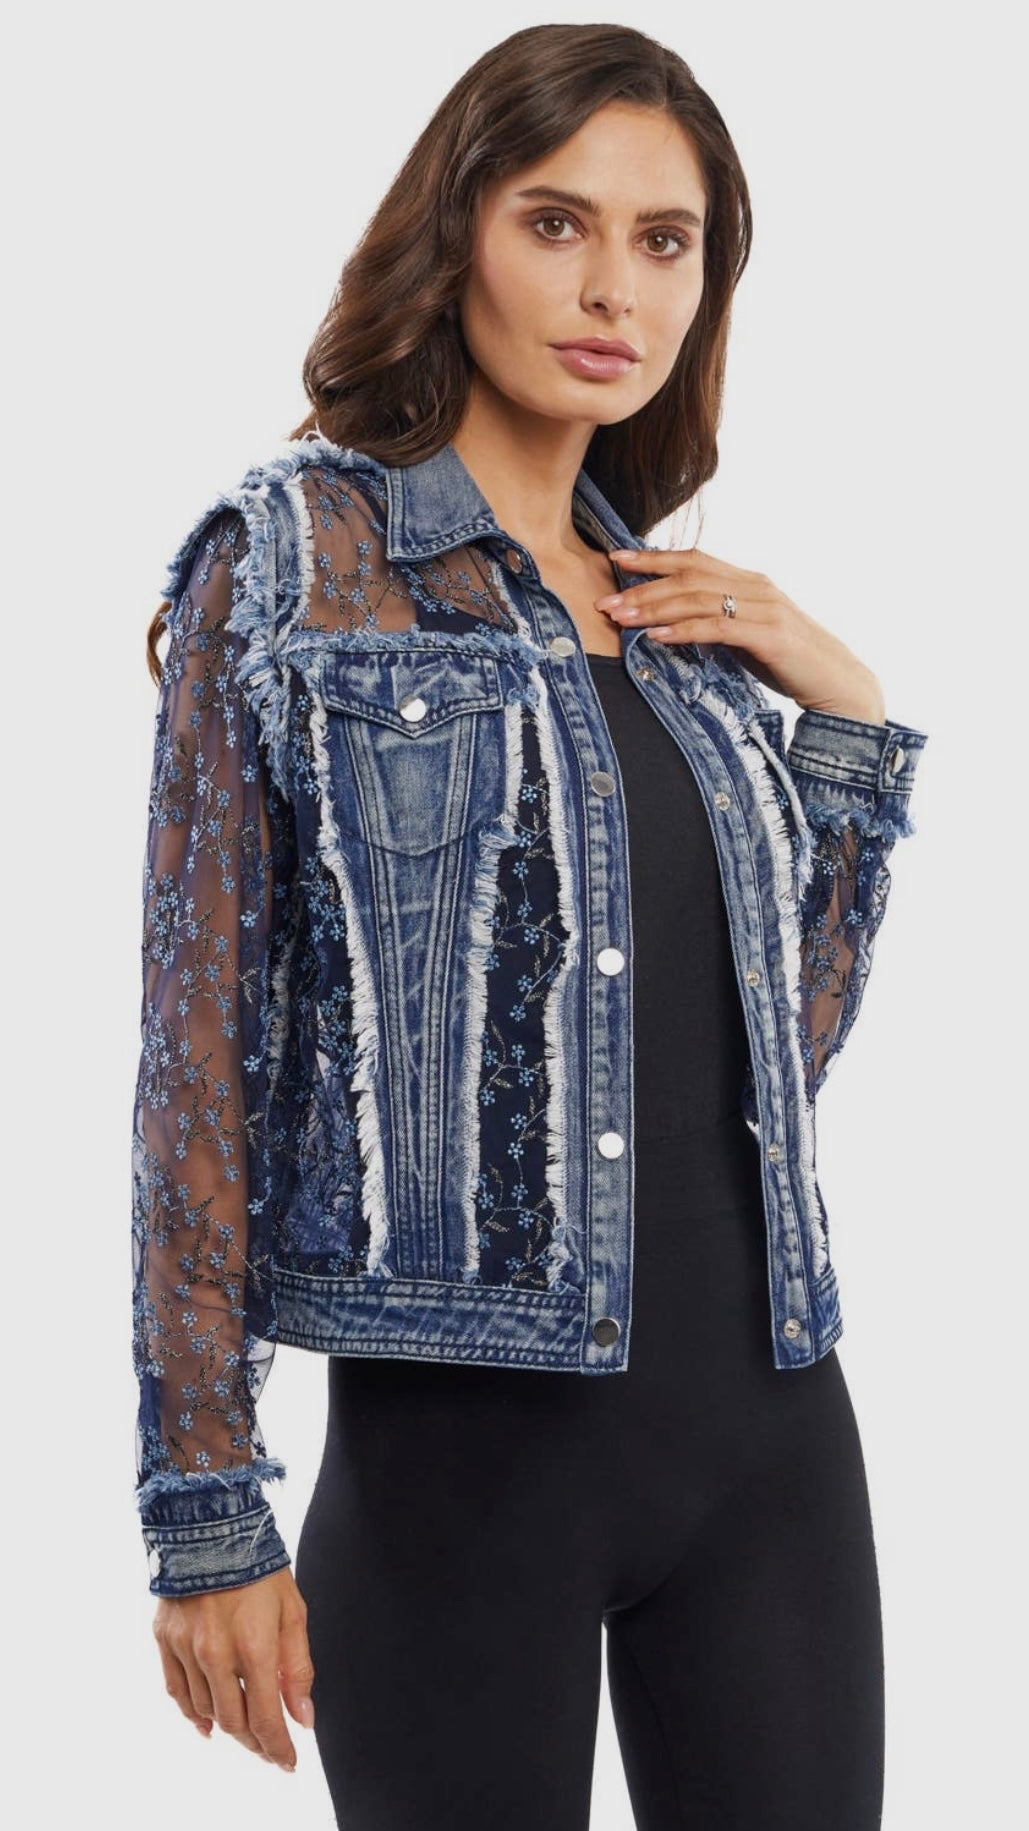 Adore A7217 1228A Denim Sheer Jacket with Embroidery